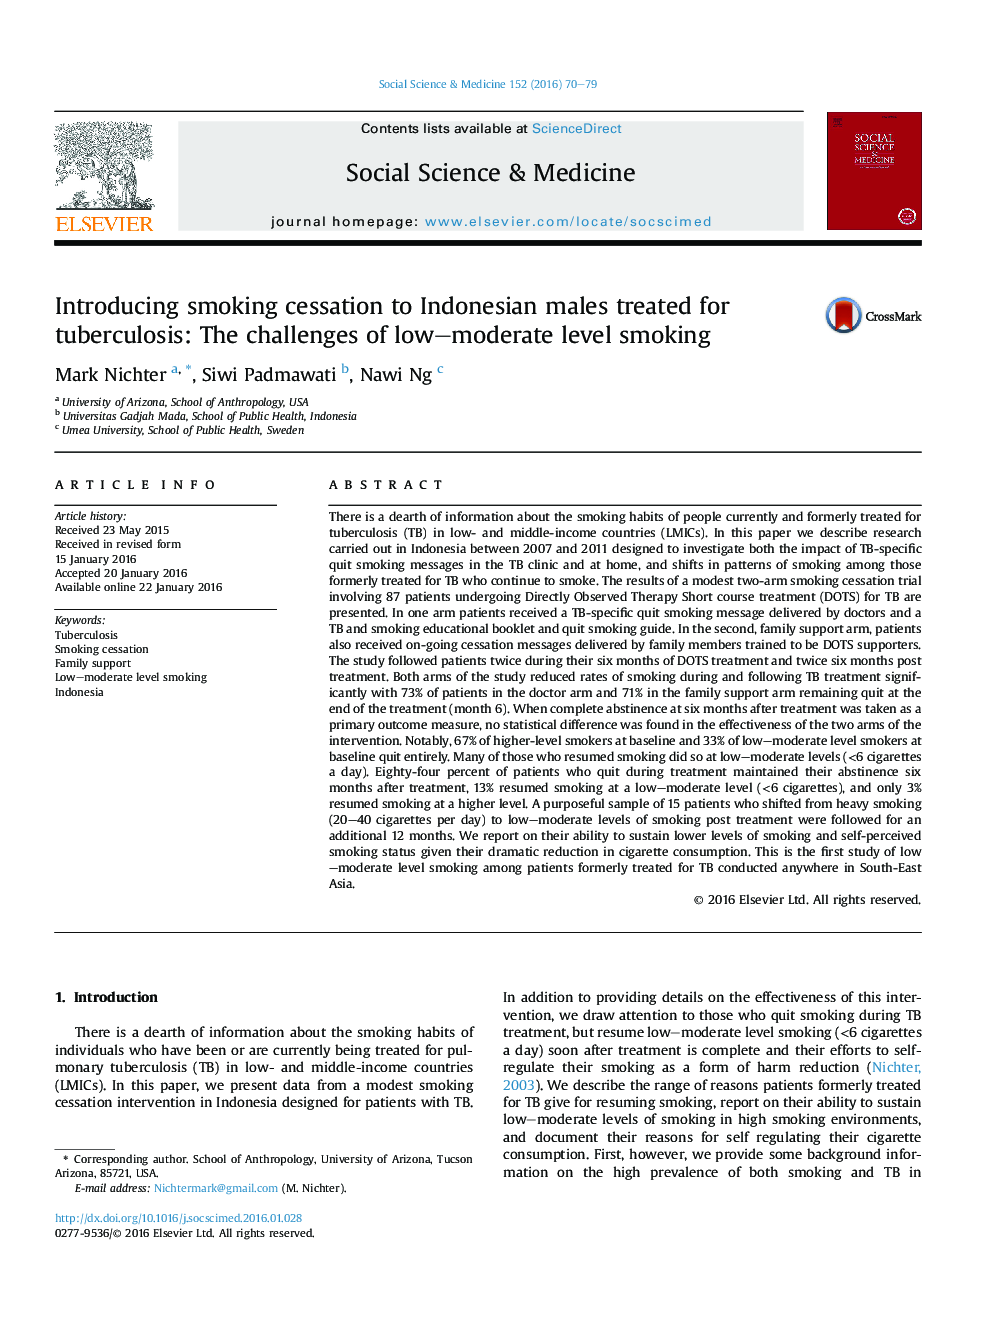 Introducing smoking cessation to Indonesian males treated for tuberculosis: The challenges of low-moderate level smoking